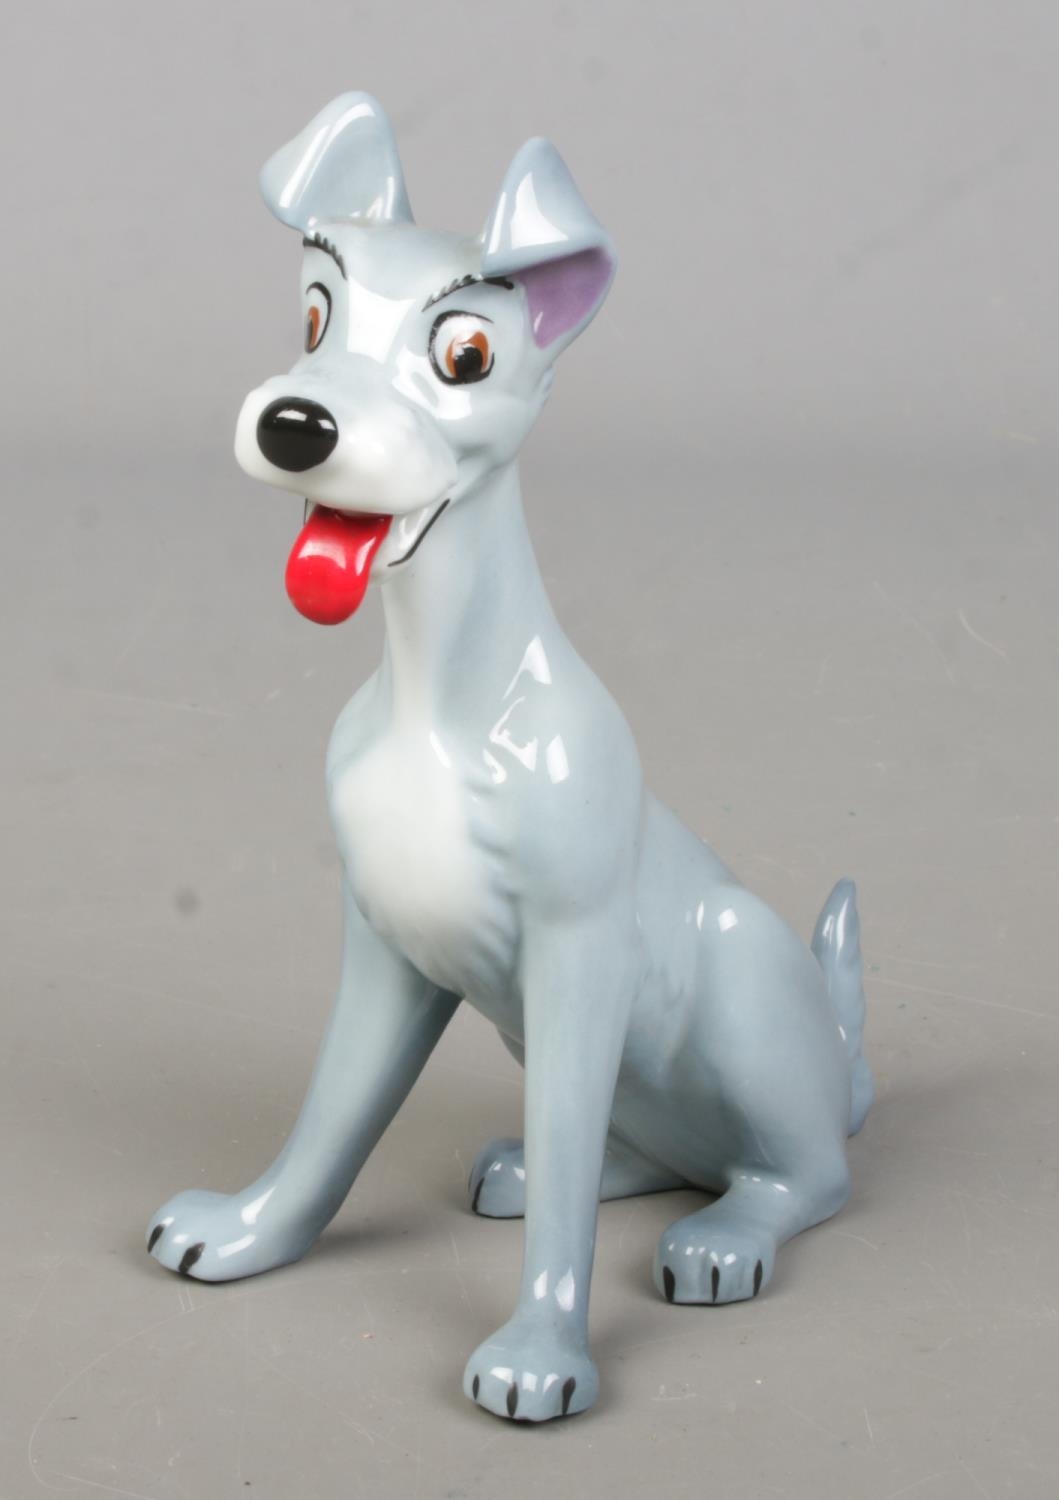 A Wade ceramic figure of Tramp from Disney's Lady & The Tramp. Height 14.5cm.